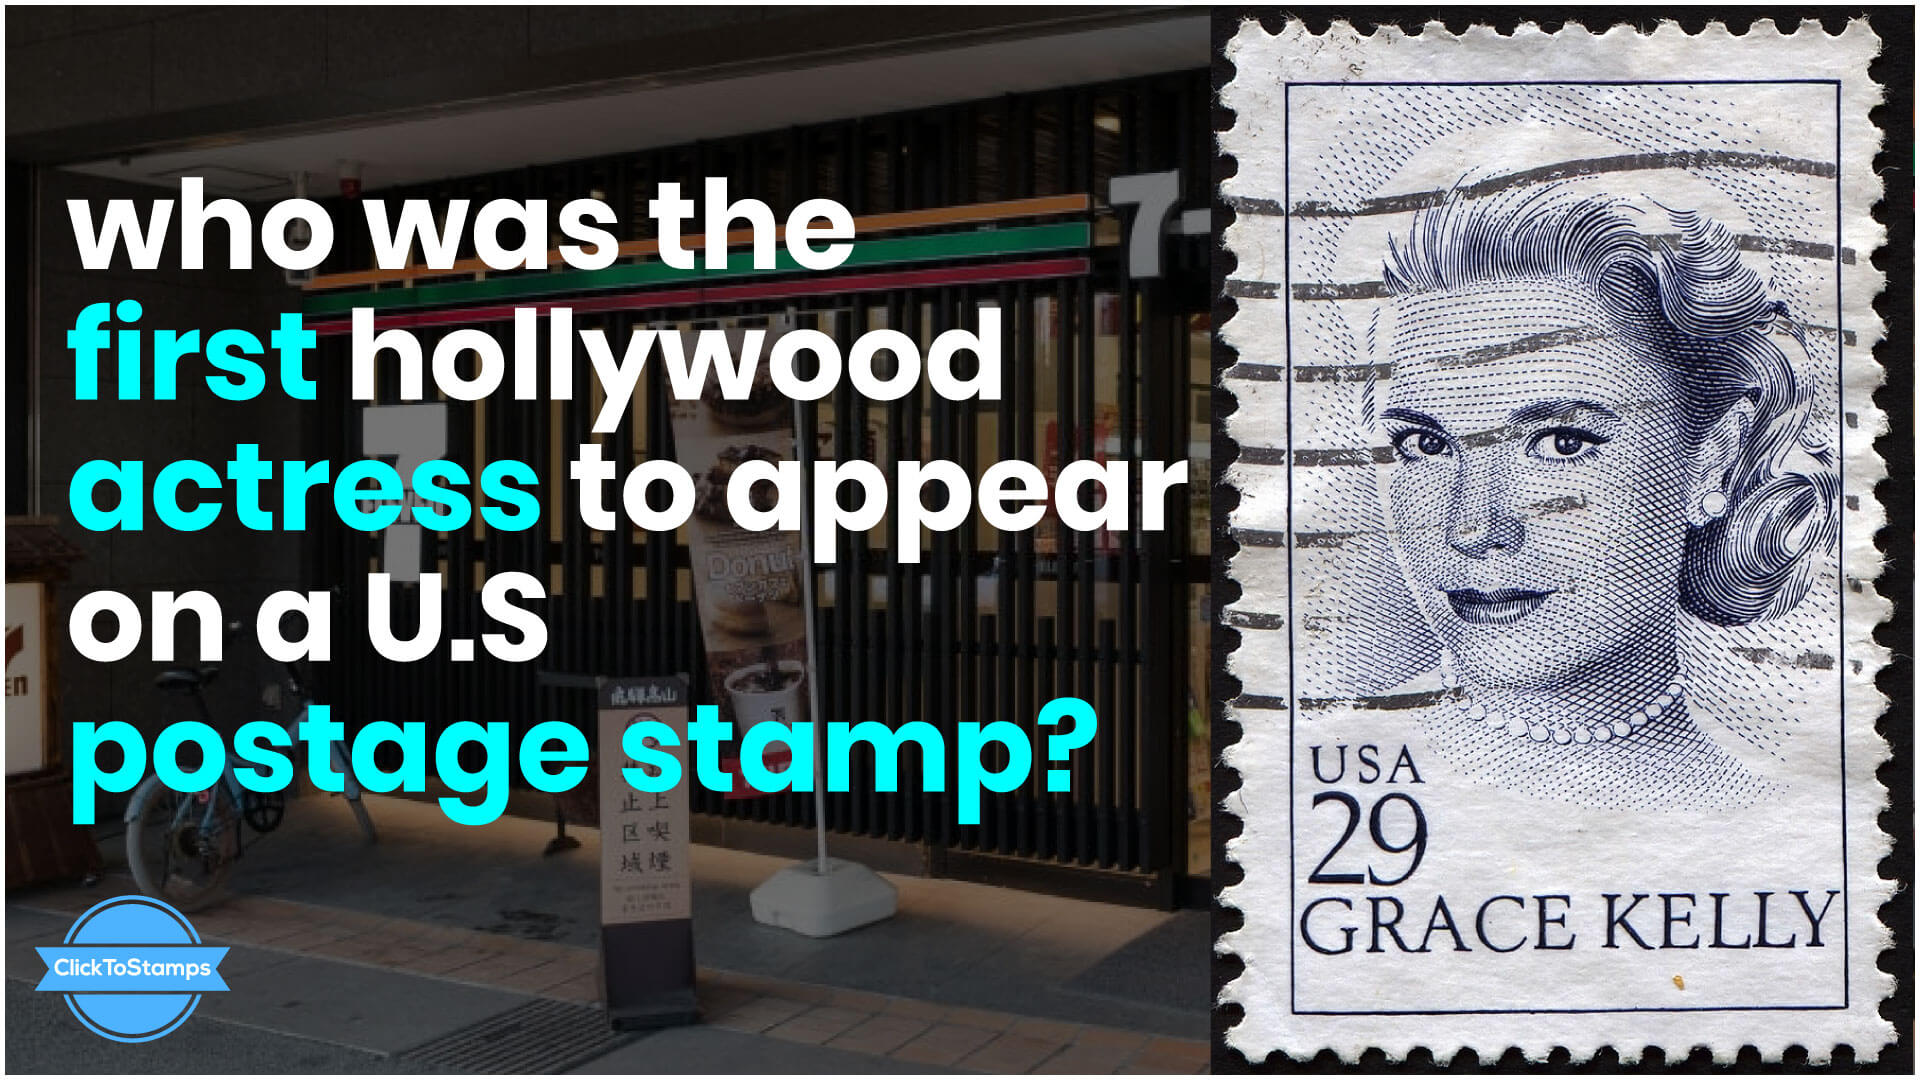 Who was the first Hollywood actress to appear on a U.S postage stamp